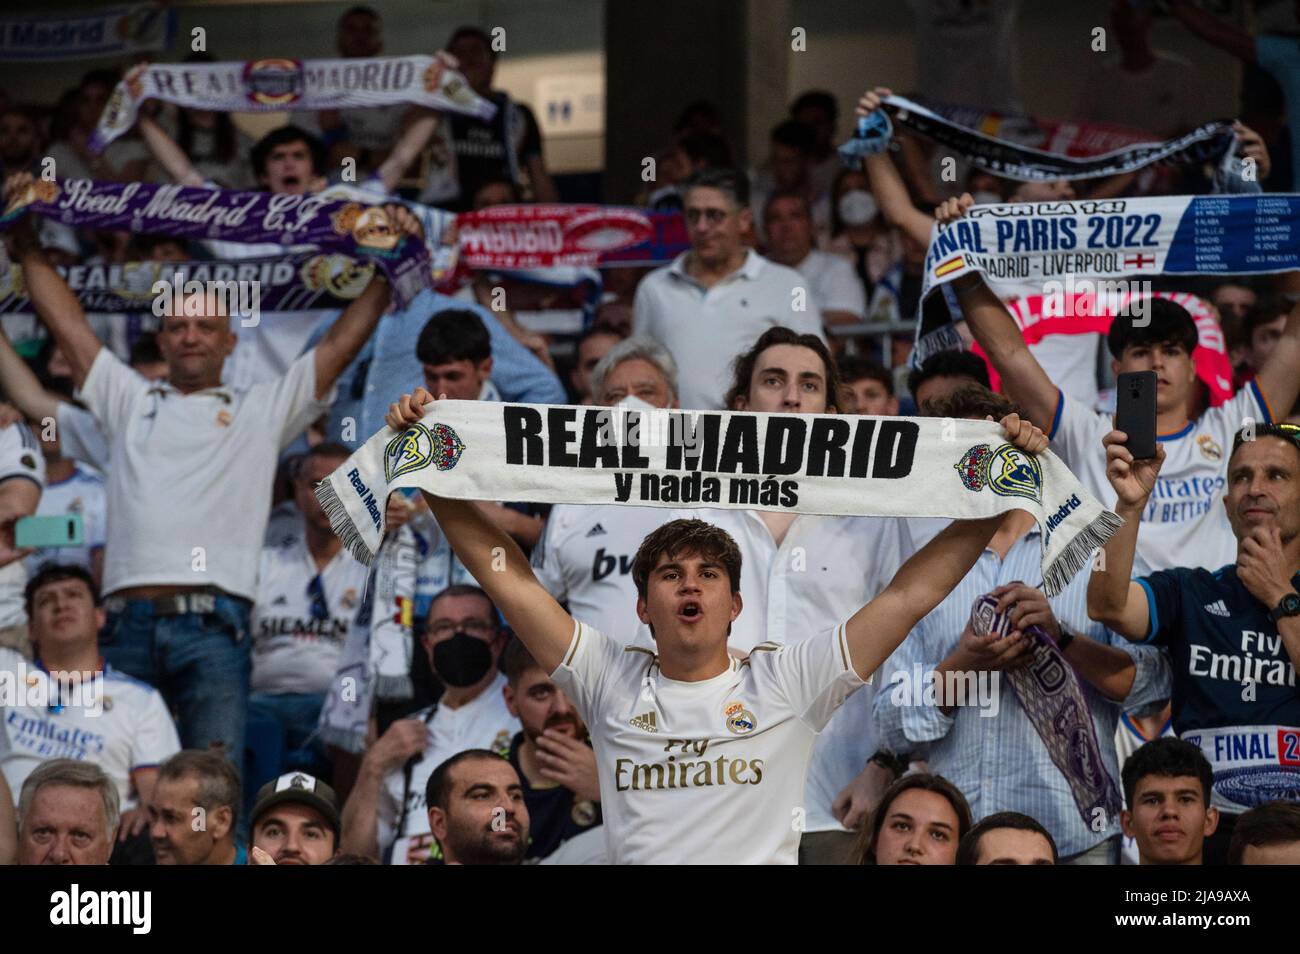 Real Madrid fans watch live on large screens the 2022 UEFA Champions League final match between Liverpool and Real Madrid at the Santiago Bernabeu stadium in Madrid